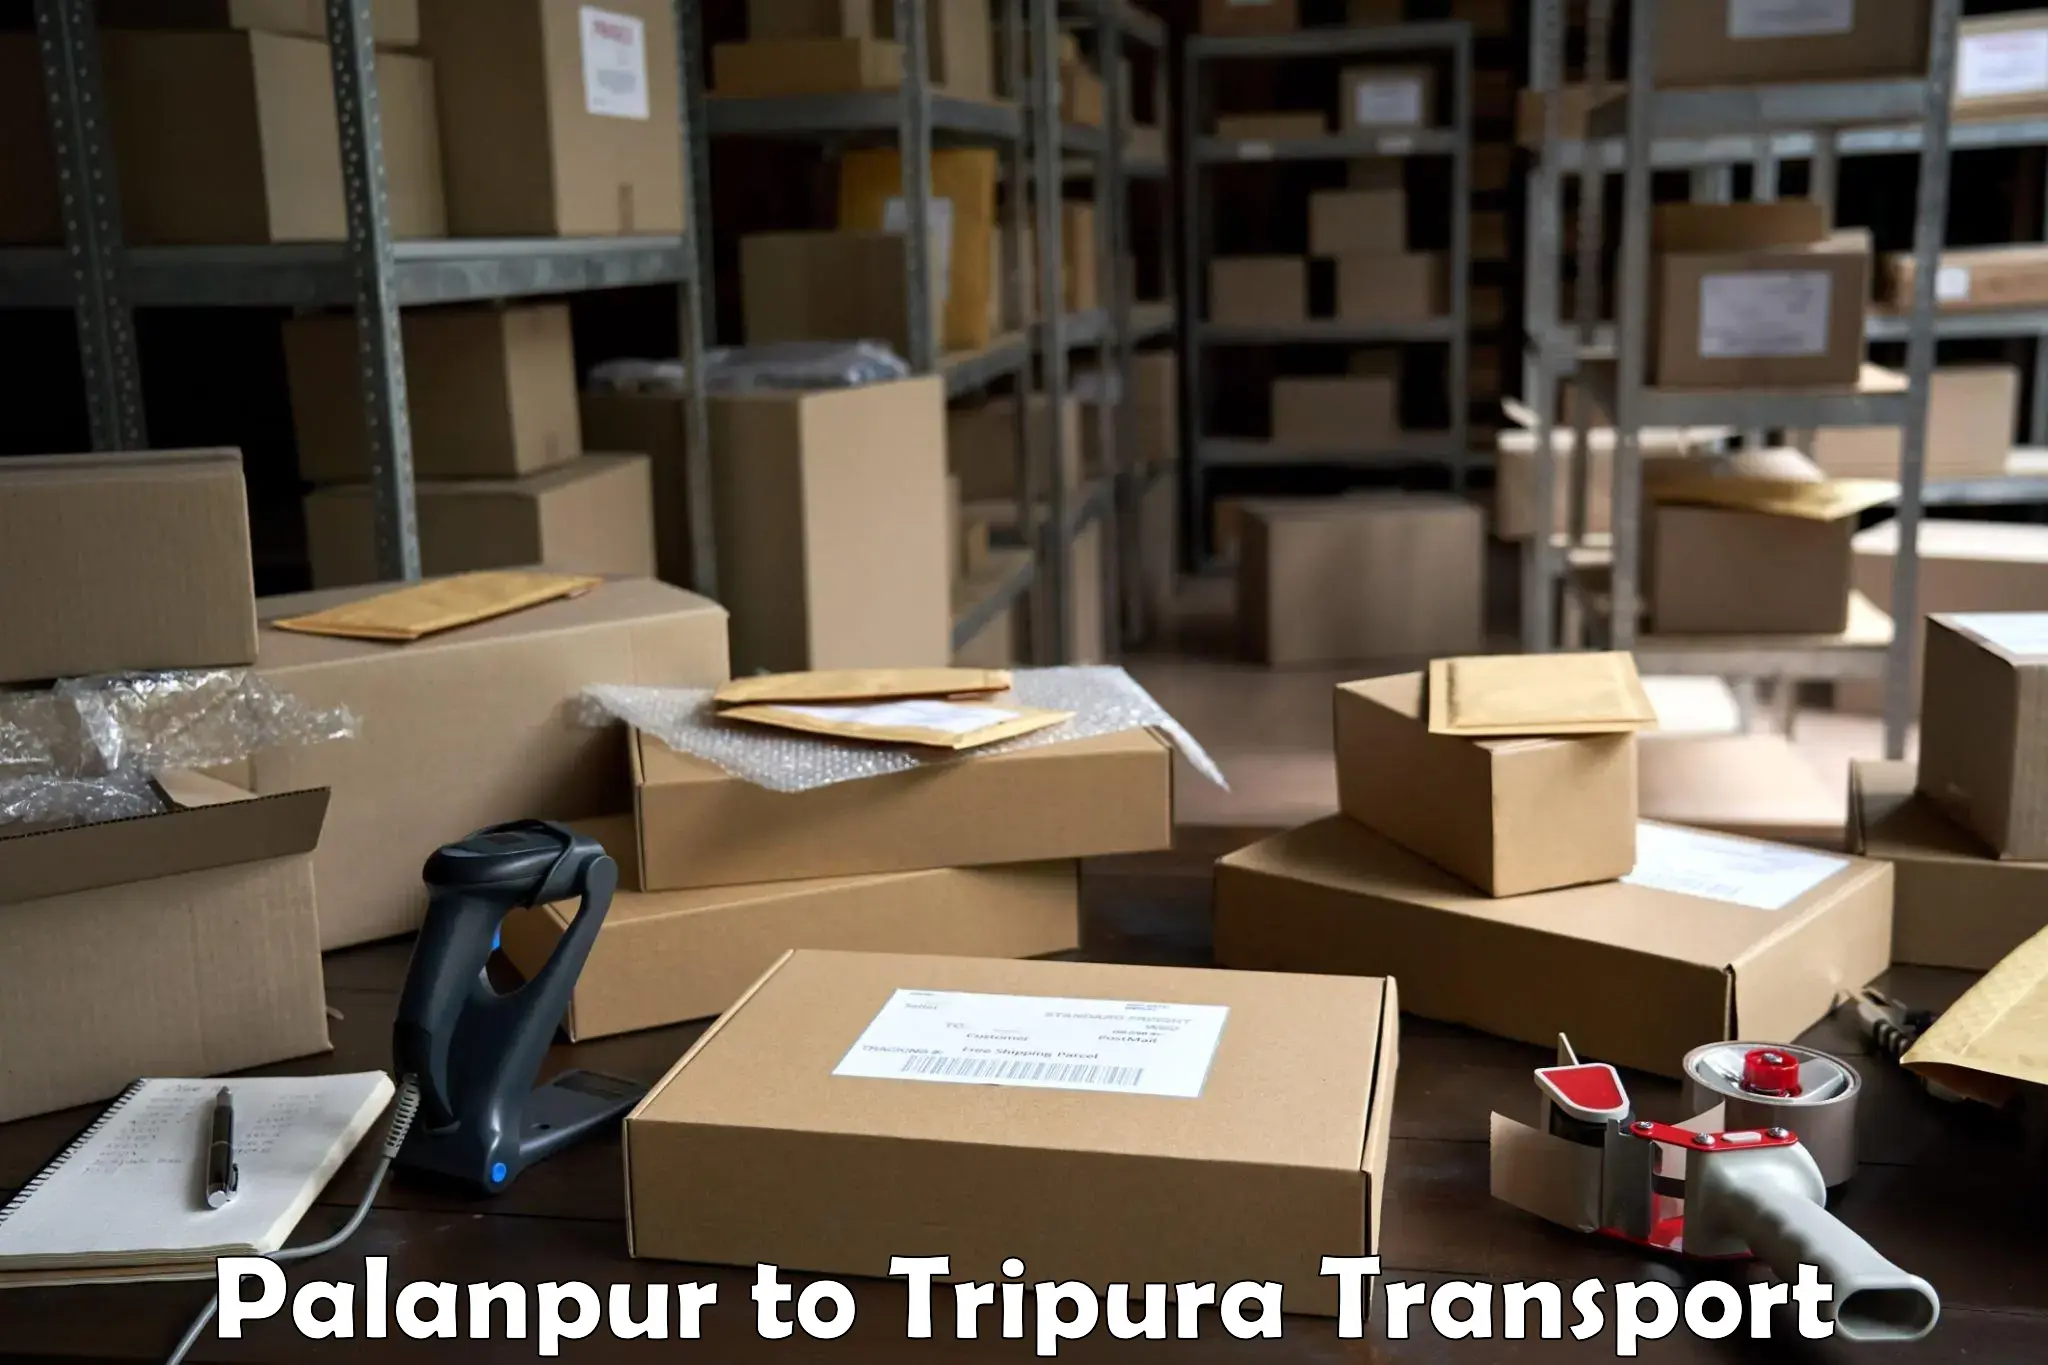 Transport shared services Palanpur to Udaipur Tripura